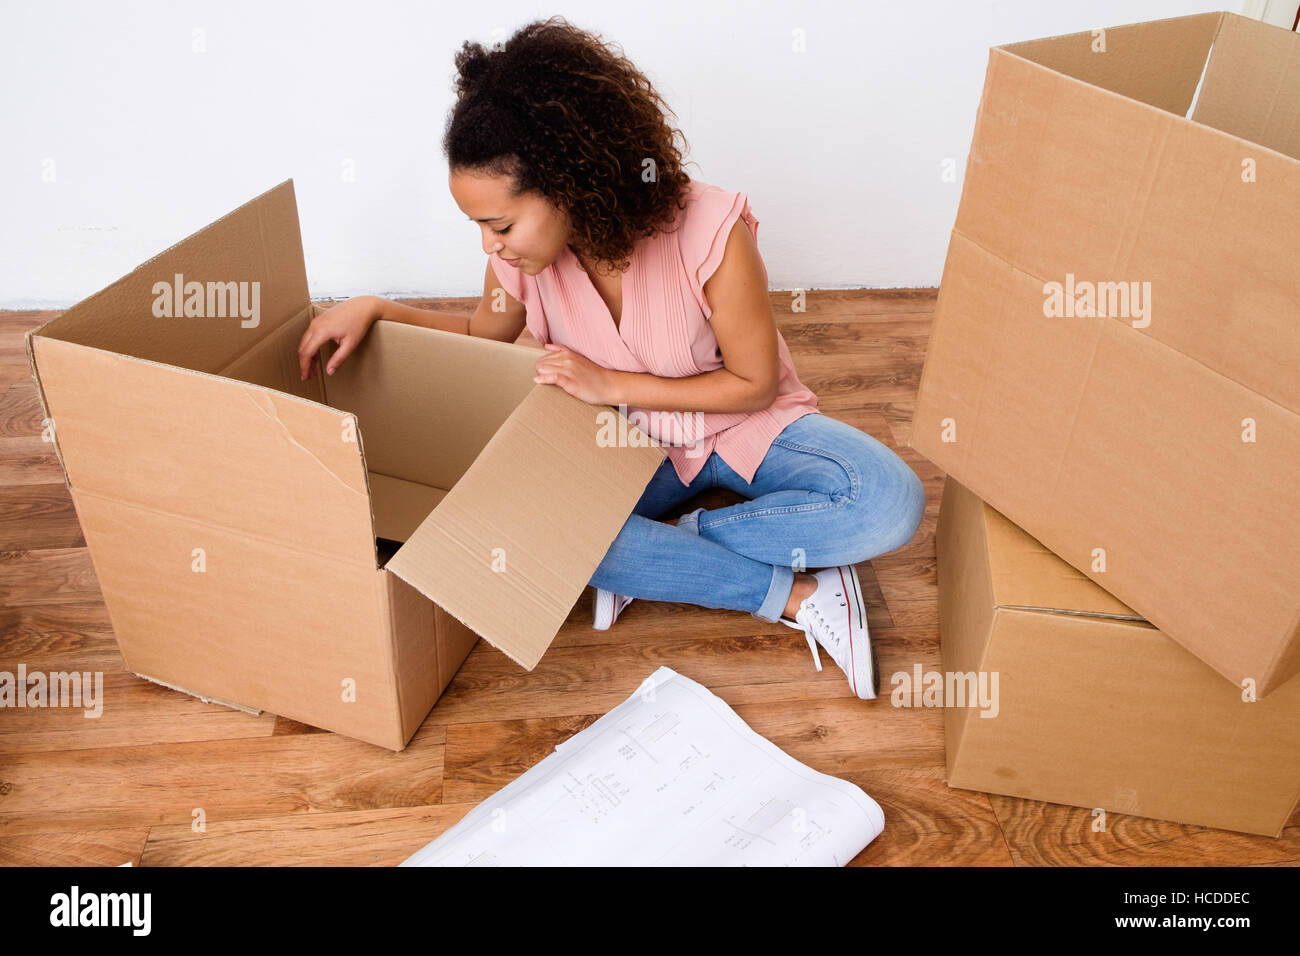 Desperate and tired woman during home relocation Stock Photo